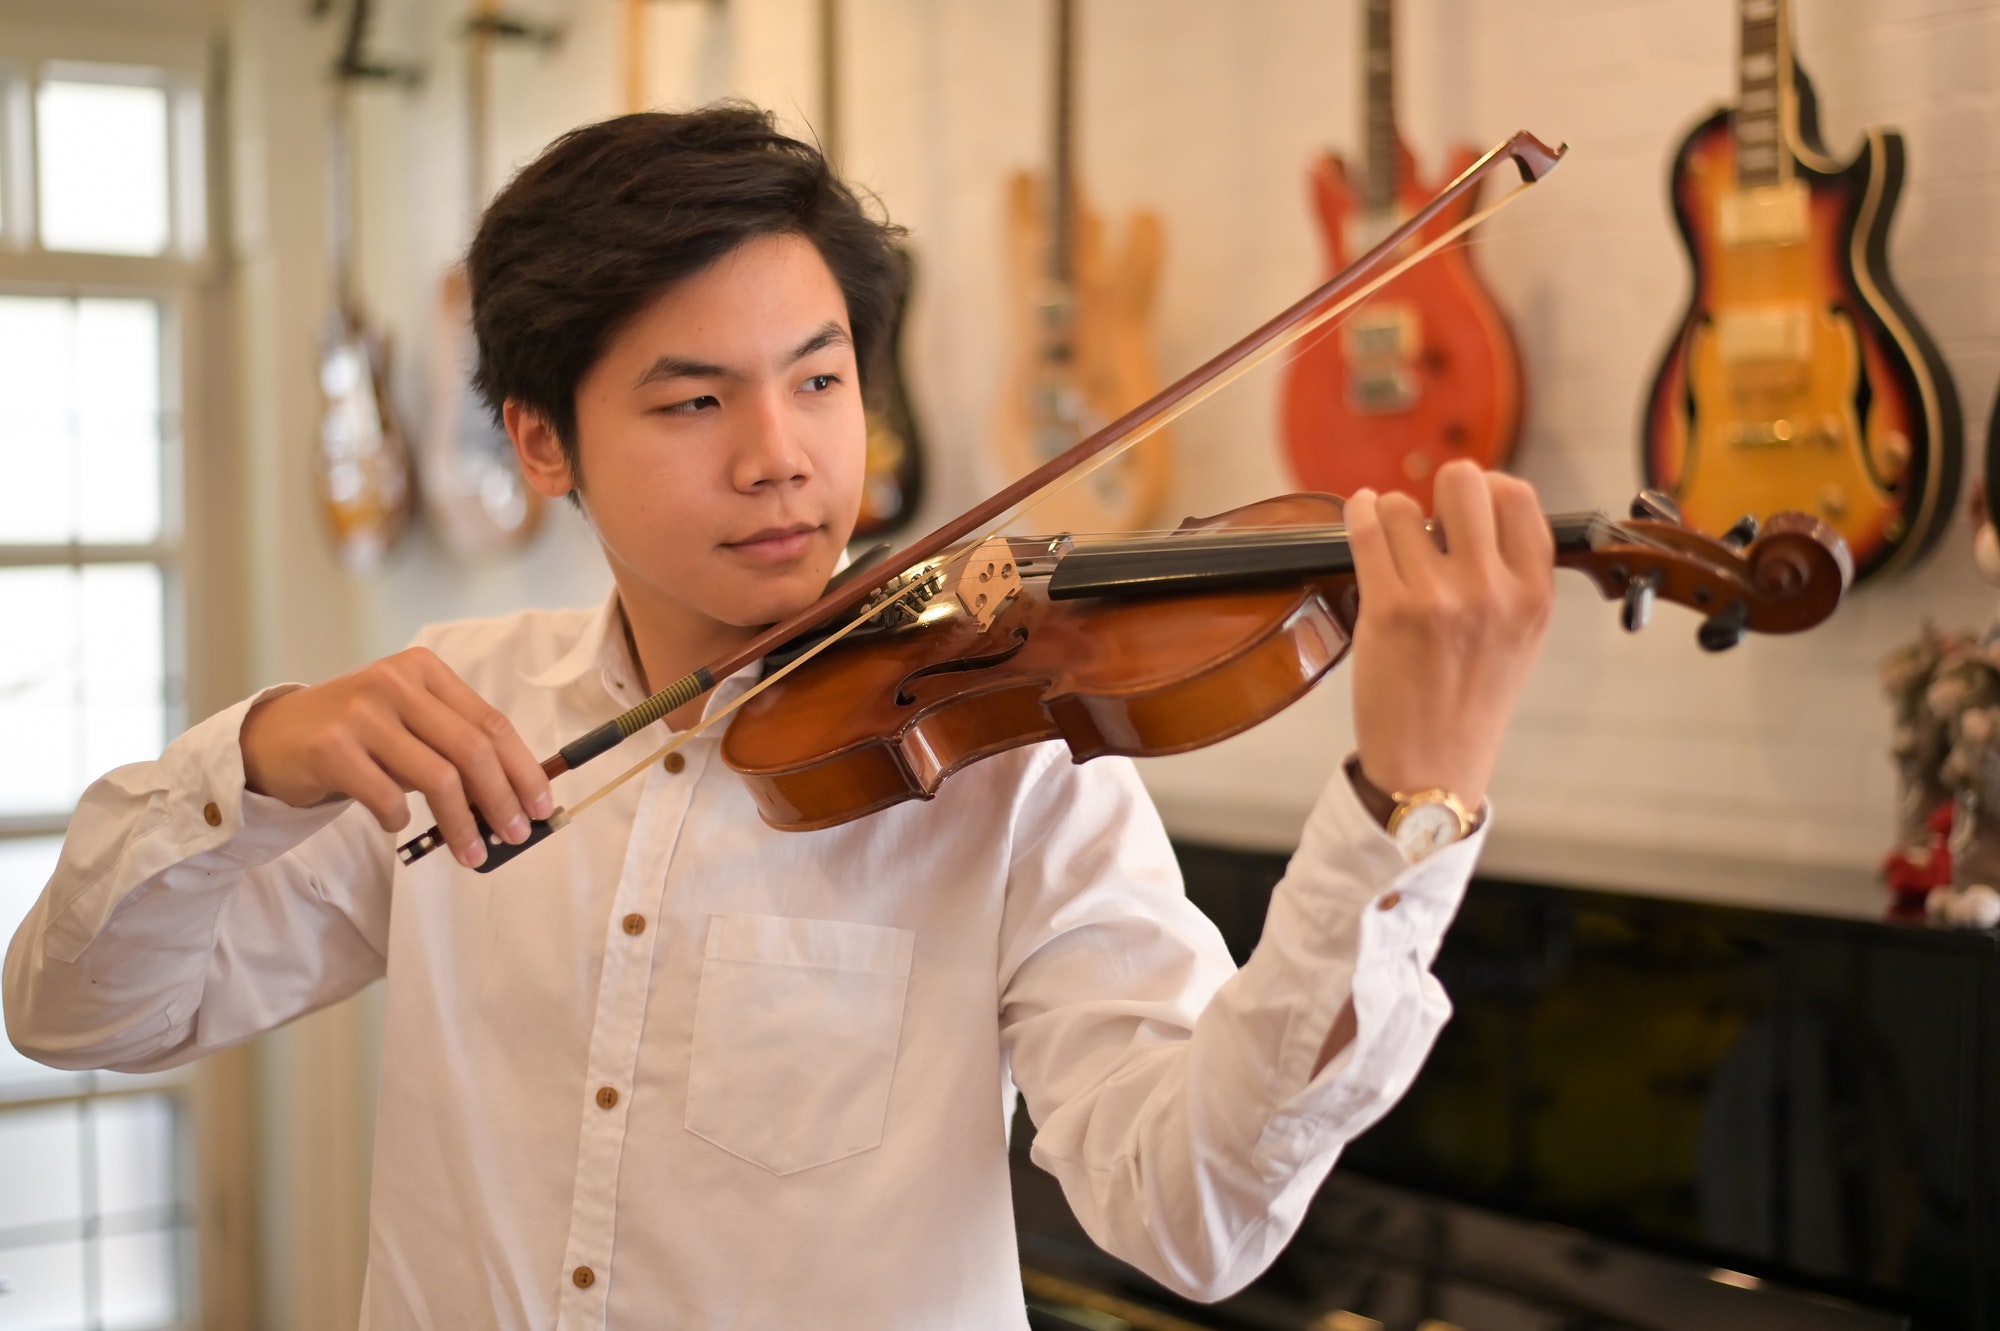 Asian Violinist playing the violin at the home. Musician playing at home.